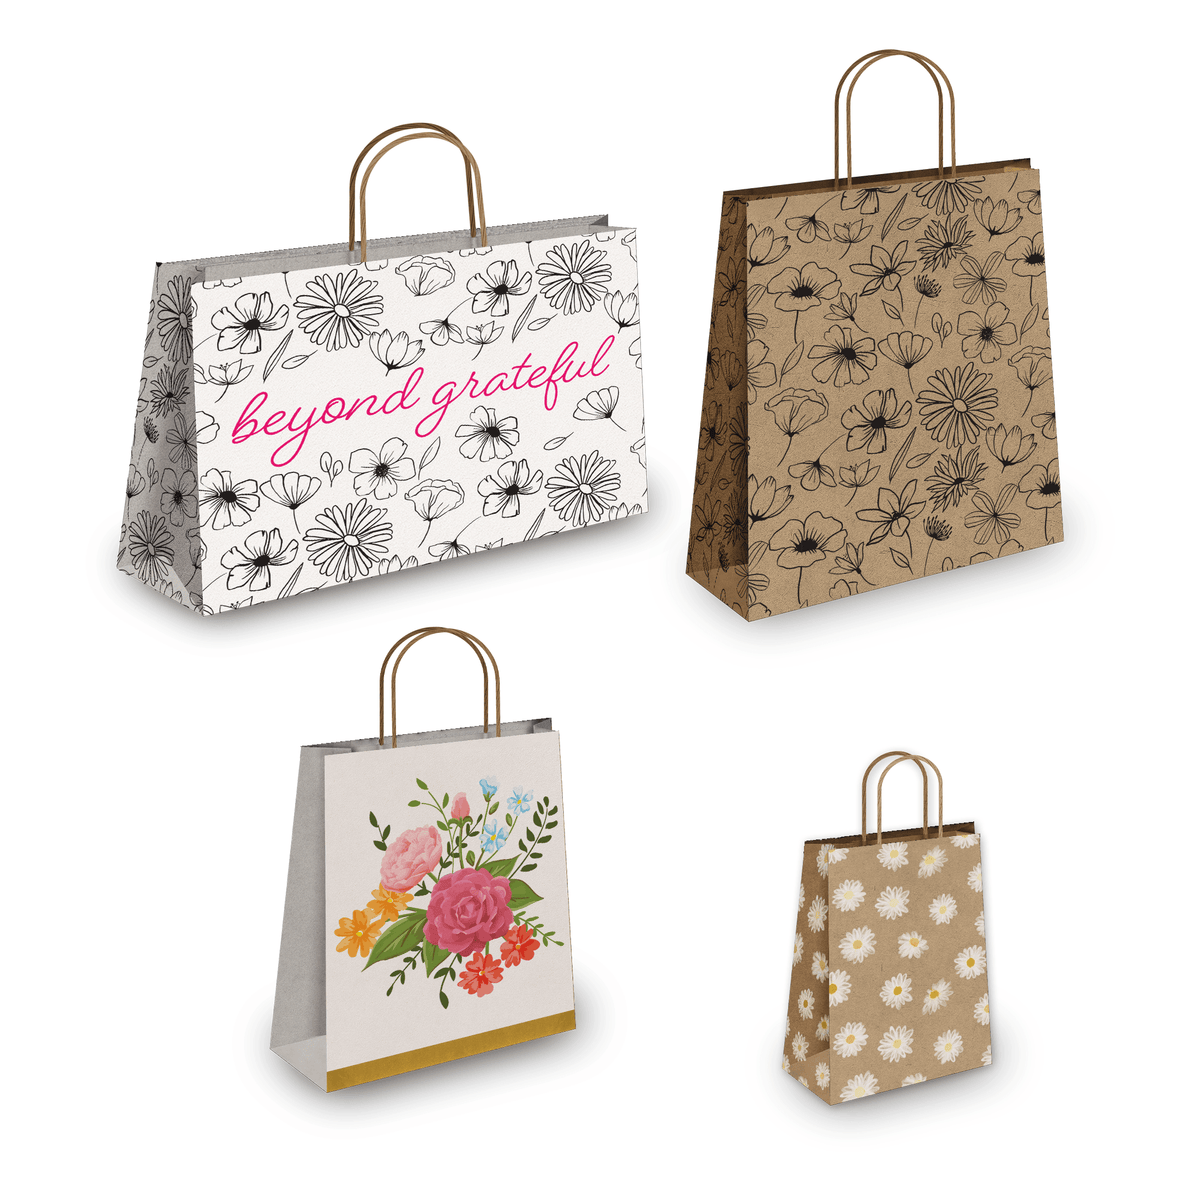 Shop Our Kraft Paper Shopping Bags with Handles Collection